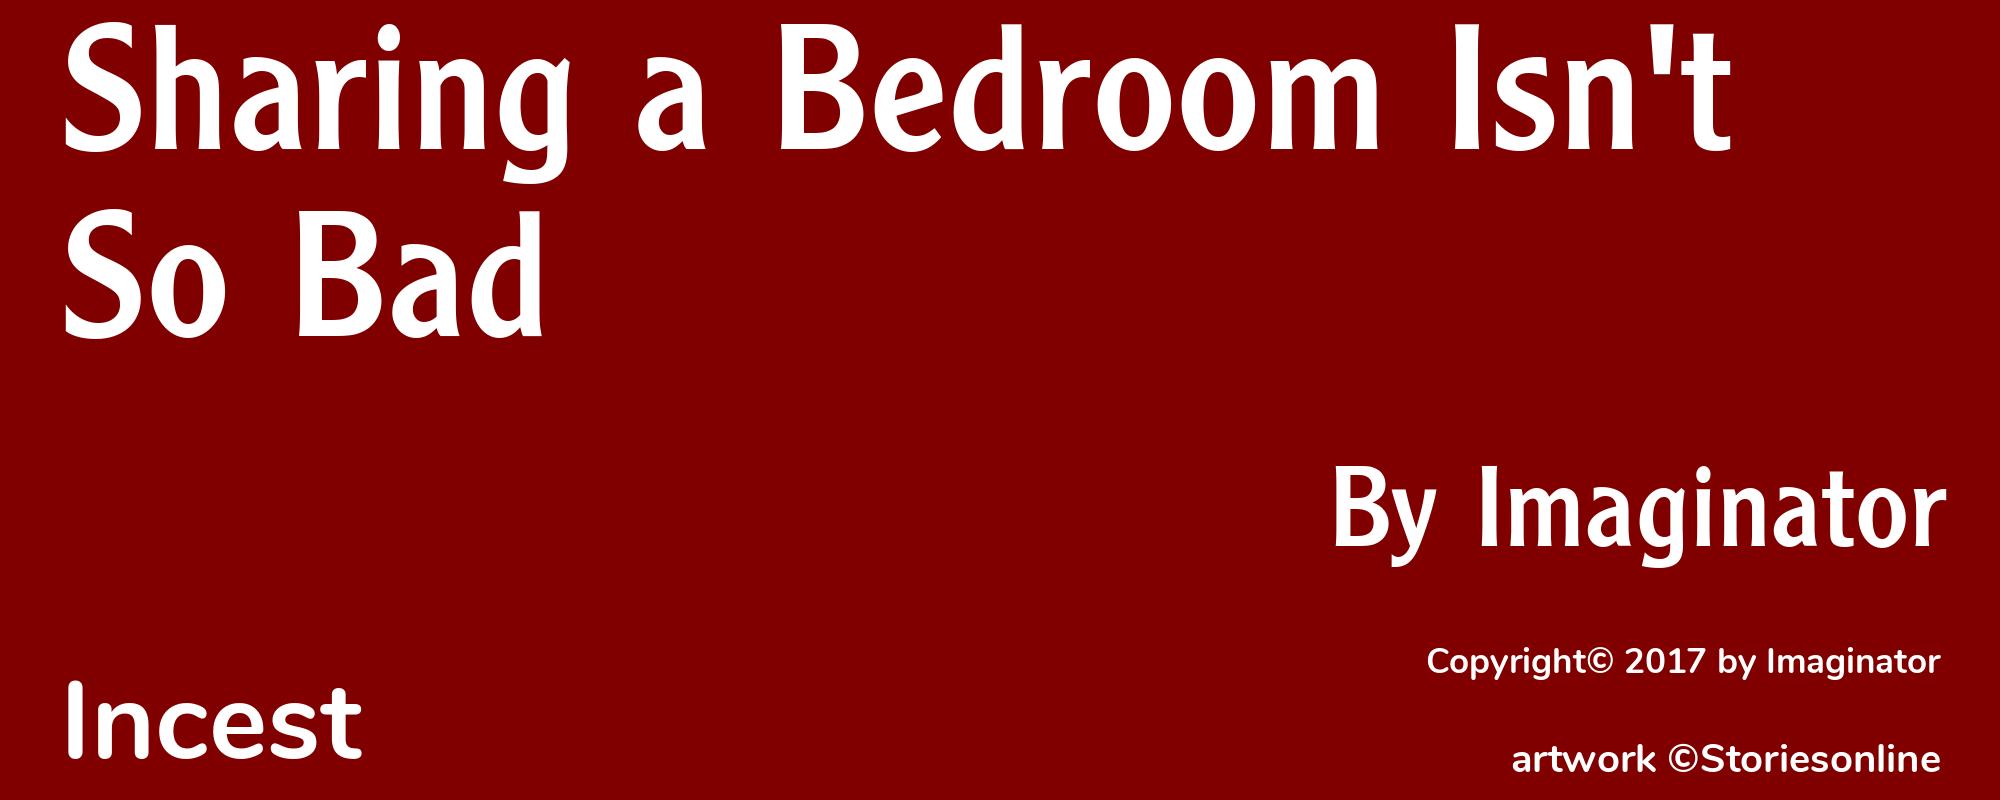 Sharing a Bedroom Isn't So Bad - Cover